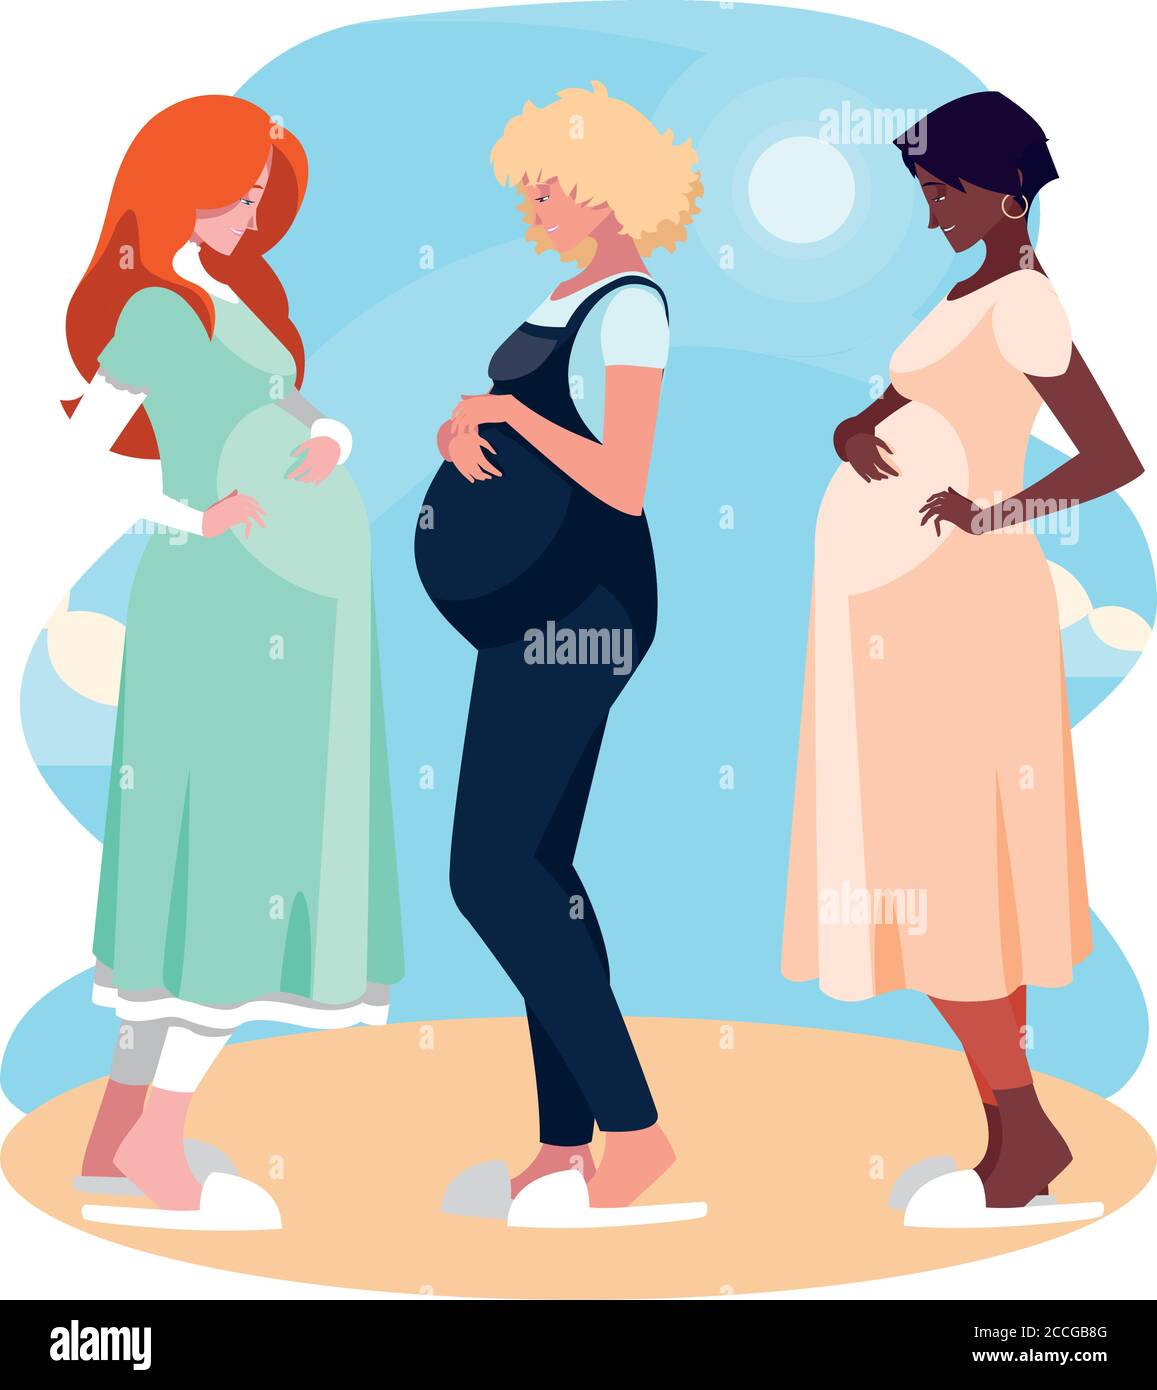 three pregnant women cartoons in front of sun and clouds design